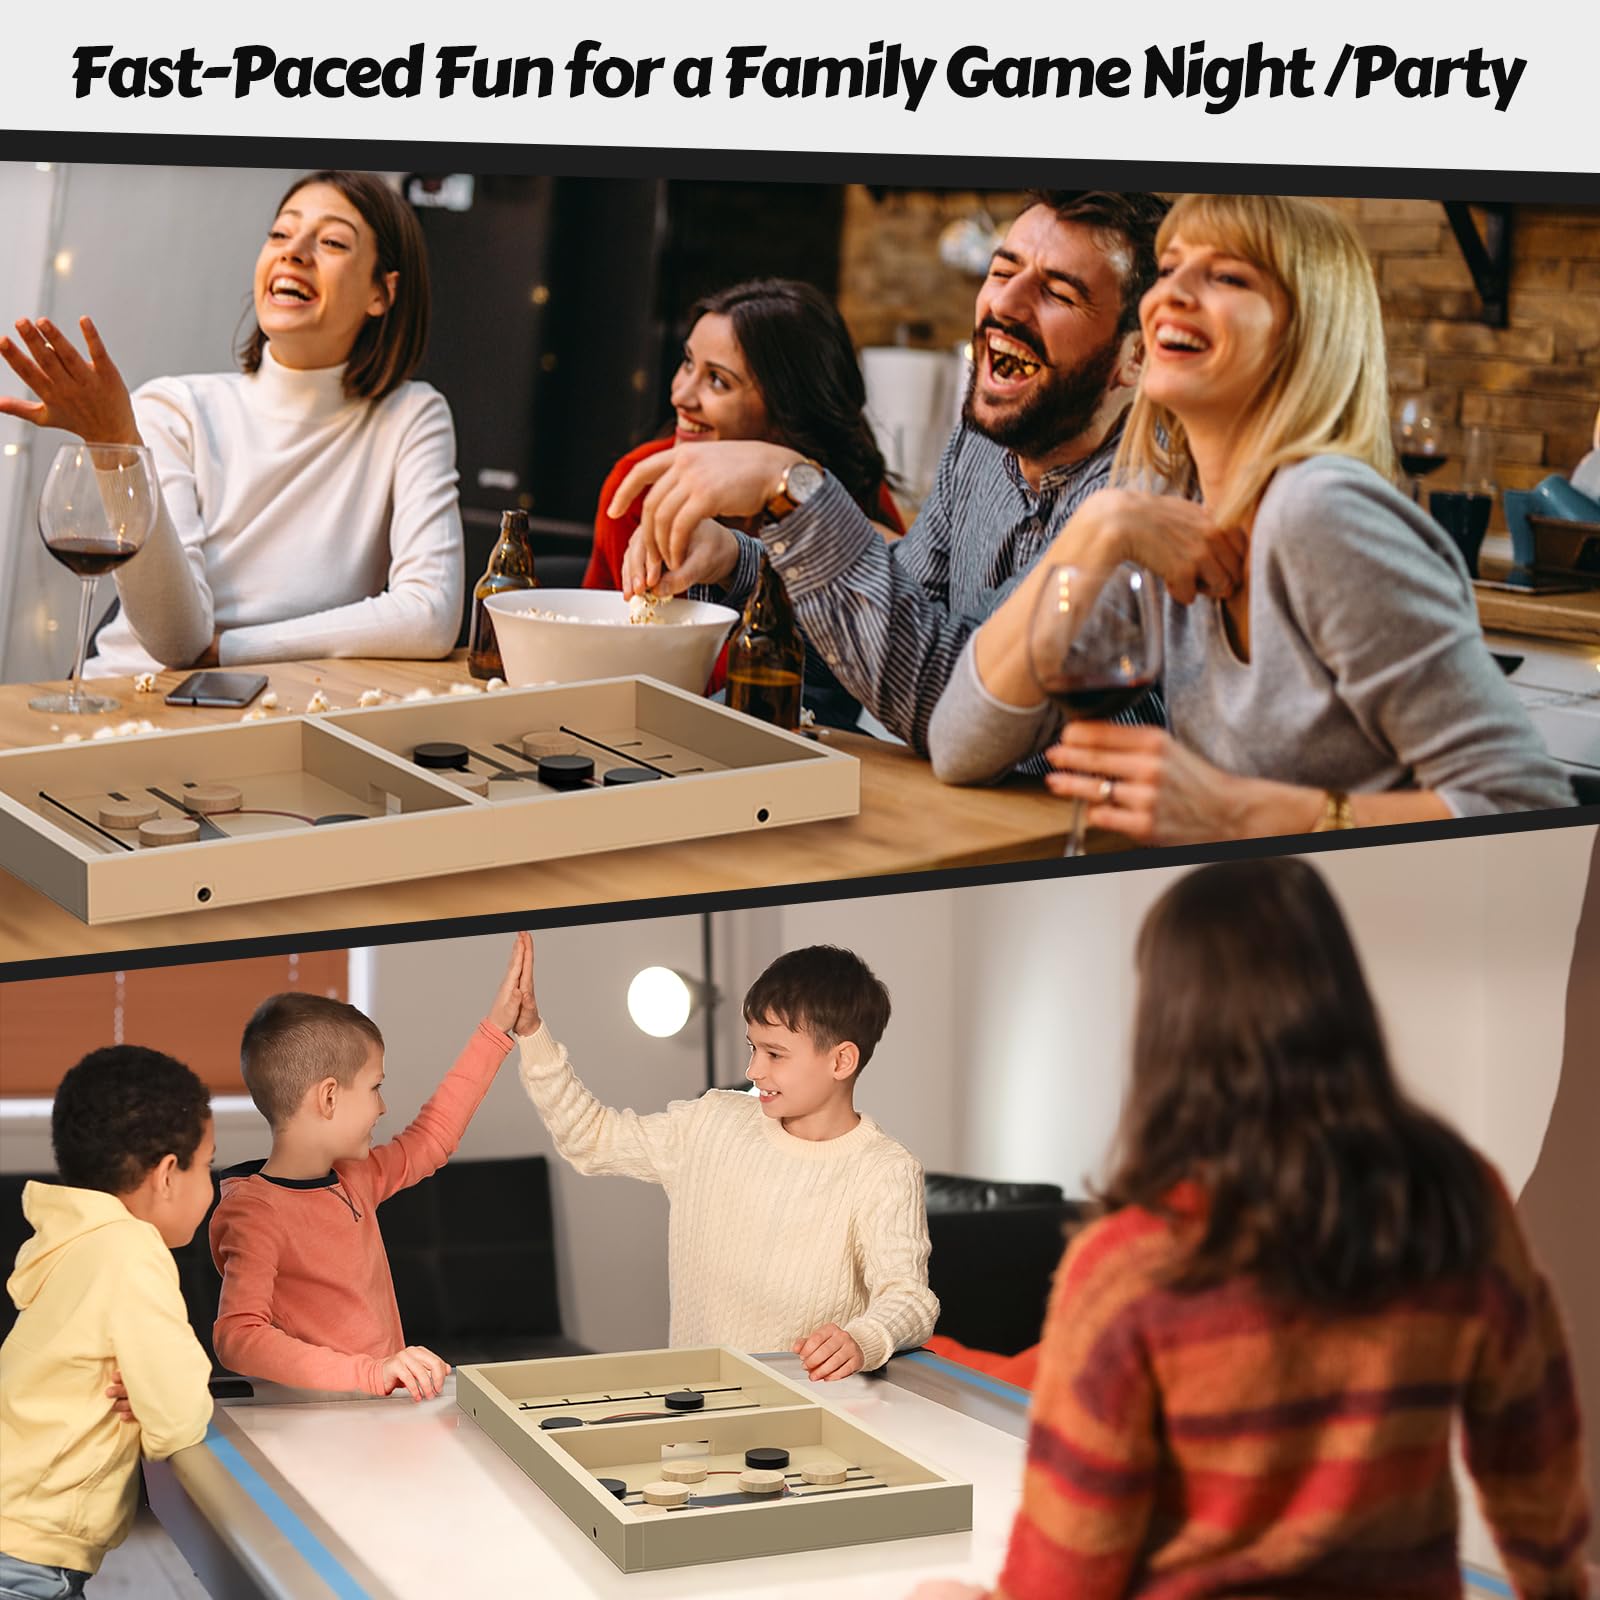 Large Fast Sling Puck Game - Fast Paced Plastic Super Winner Sling Hockey Board Games & Rapid Slingshot Battle Table - Ideal for Family Nights, Parties & Competitive Fun for Adults and Kids